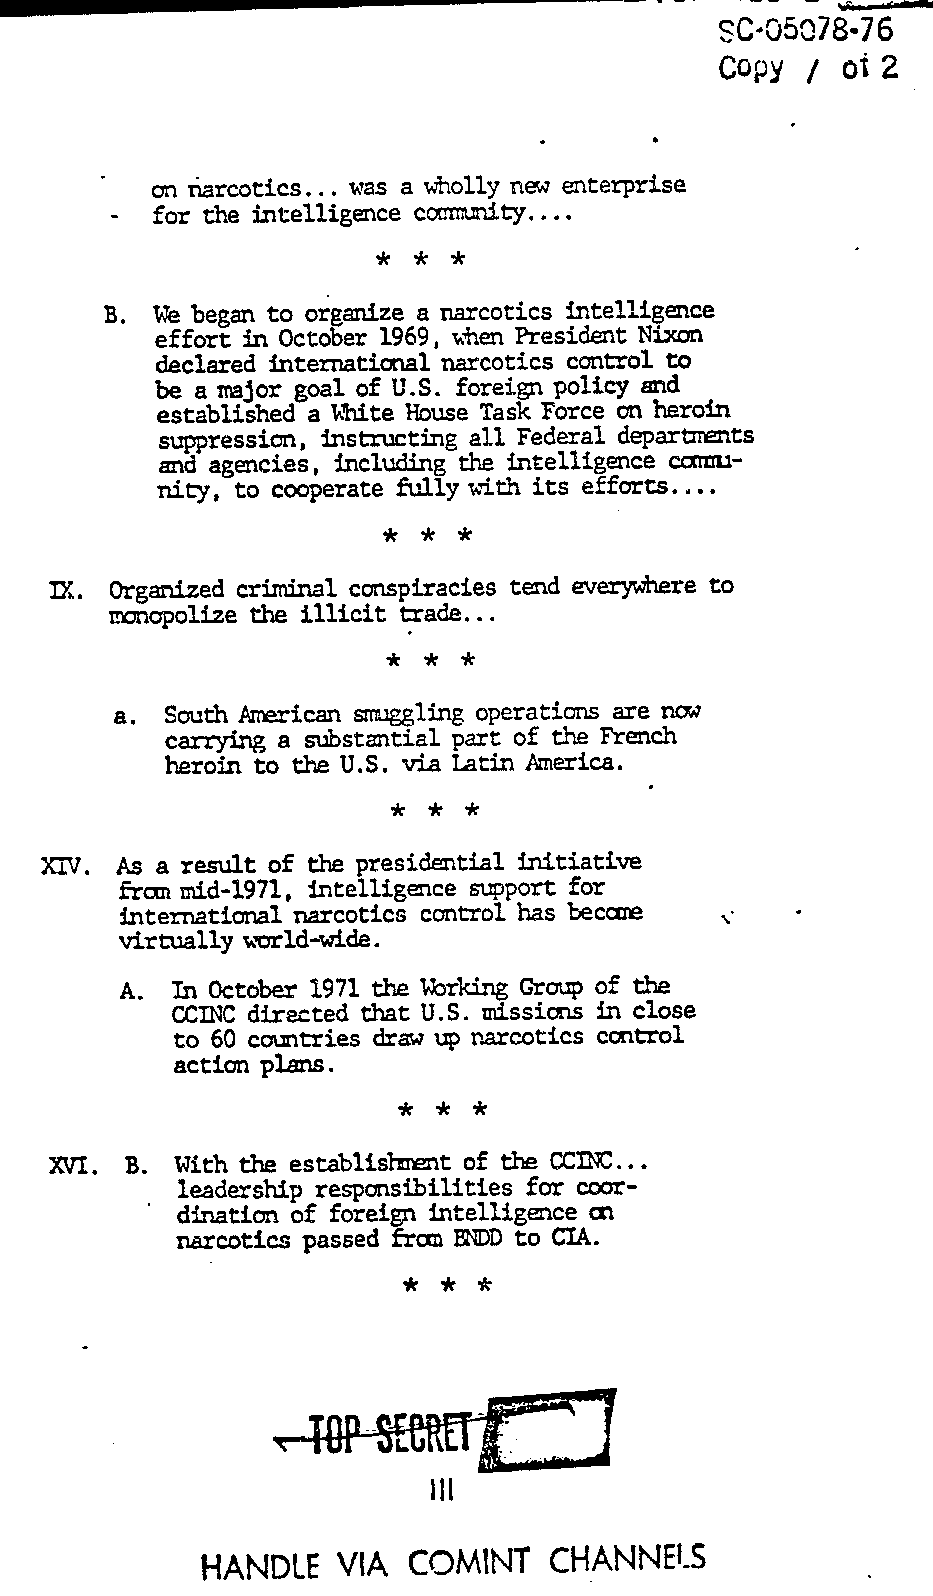 Page 119 from Report on Inquiry Into CIA Related Electronic Surveillance Activities